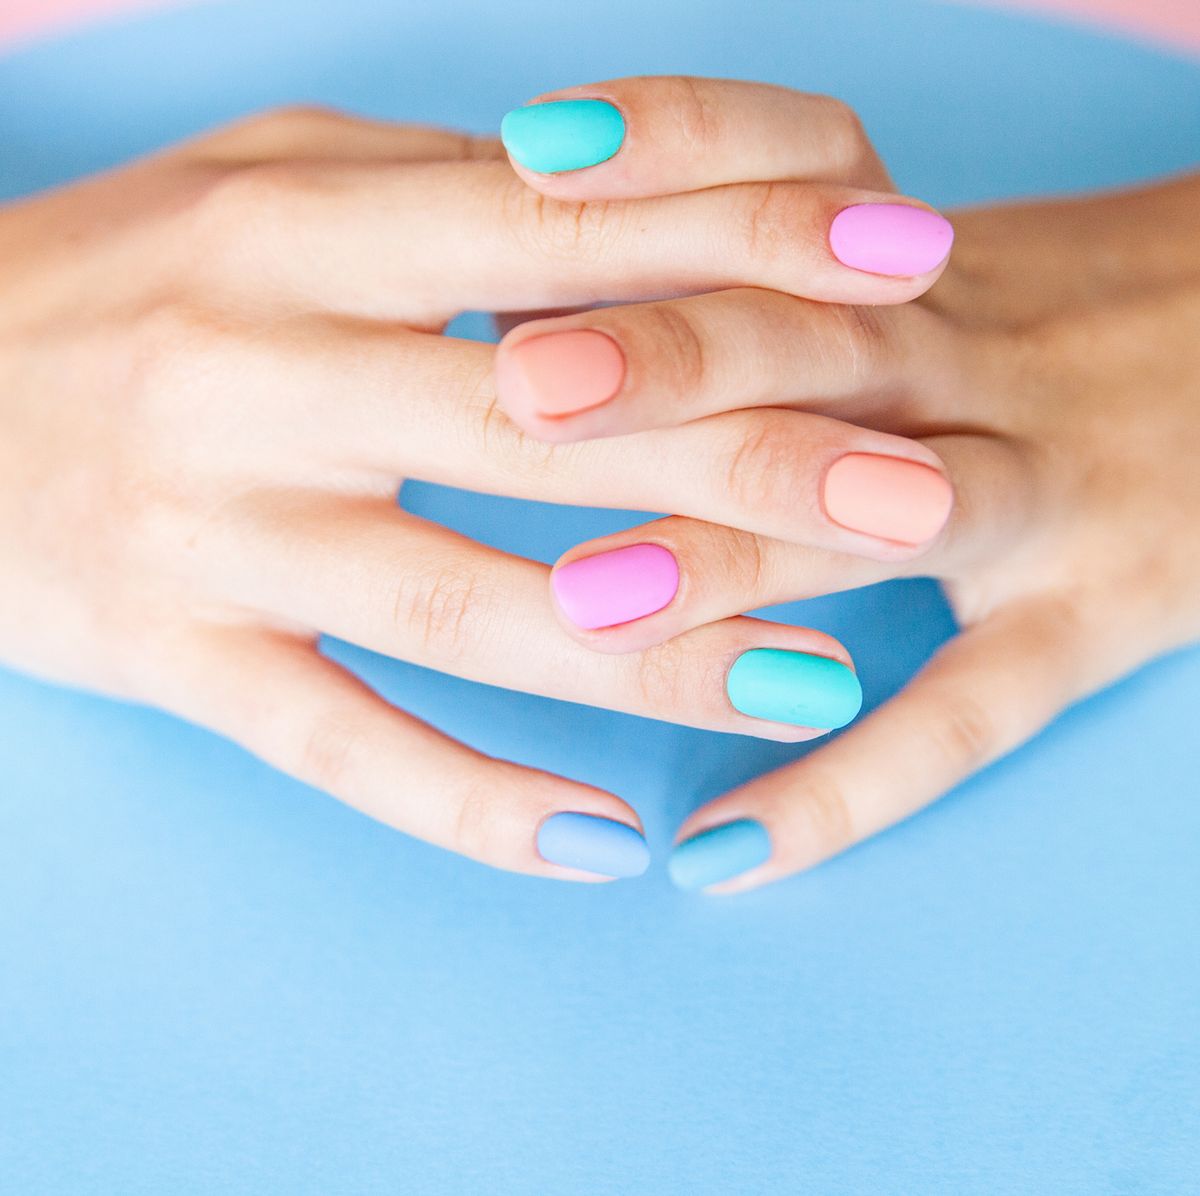 Pink nails and spa - Laurel - Book Online - Prices, Reviews, Photos